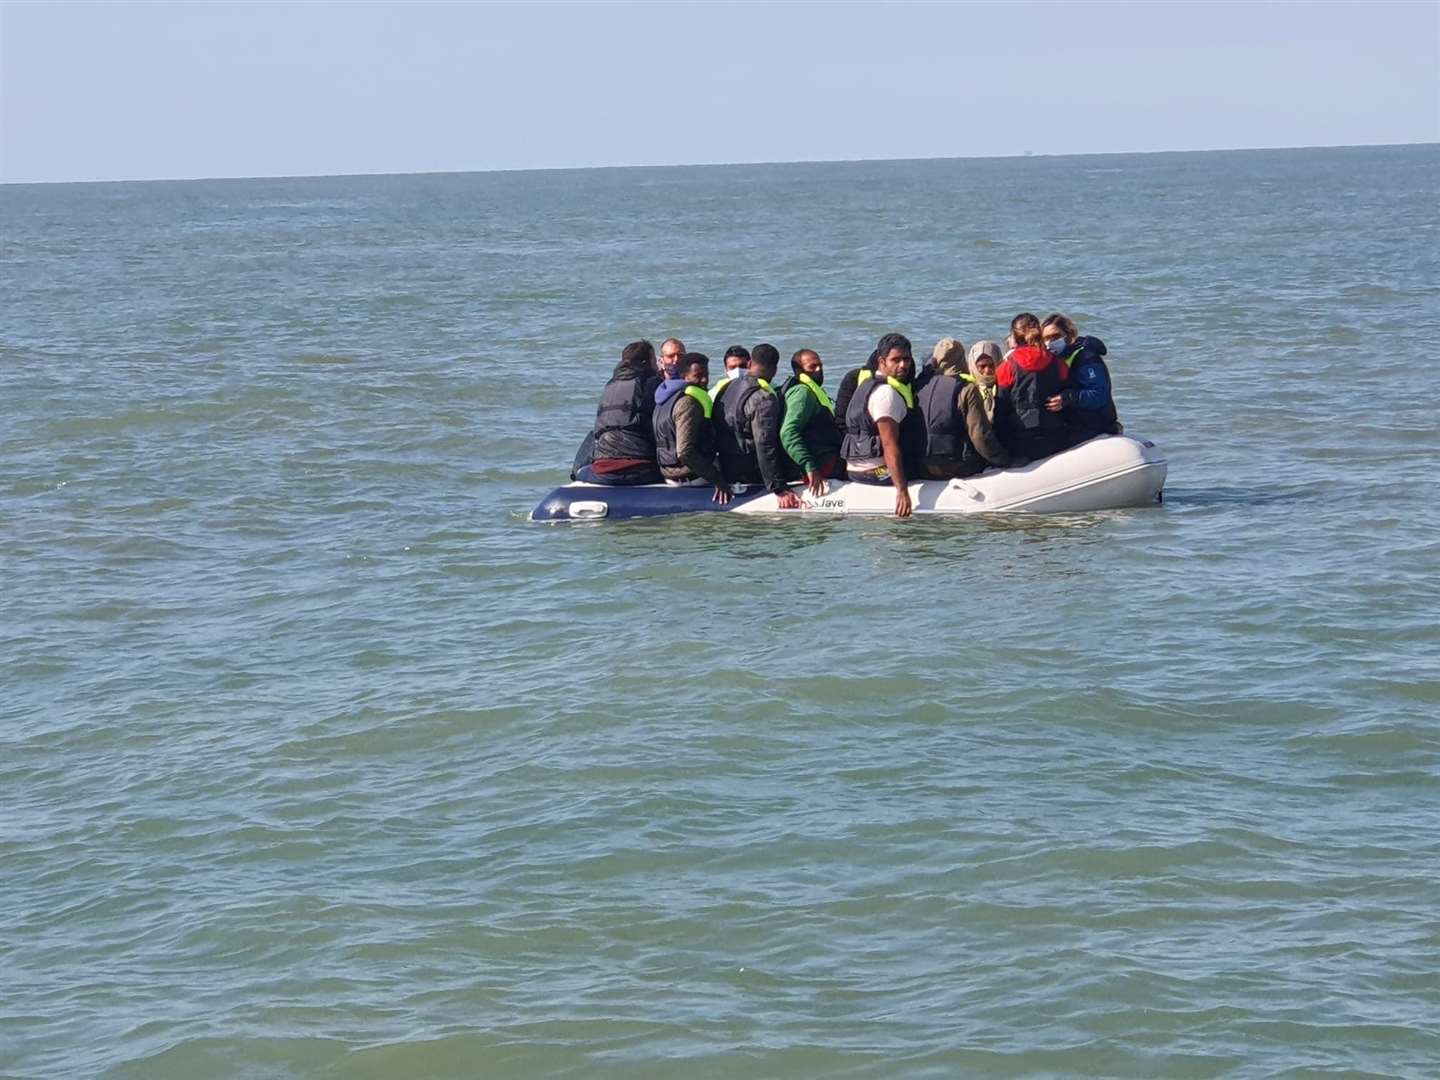 One vessel at sea carrying in excess of 13 people